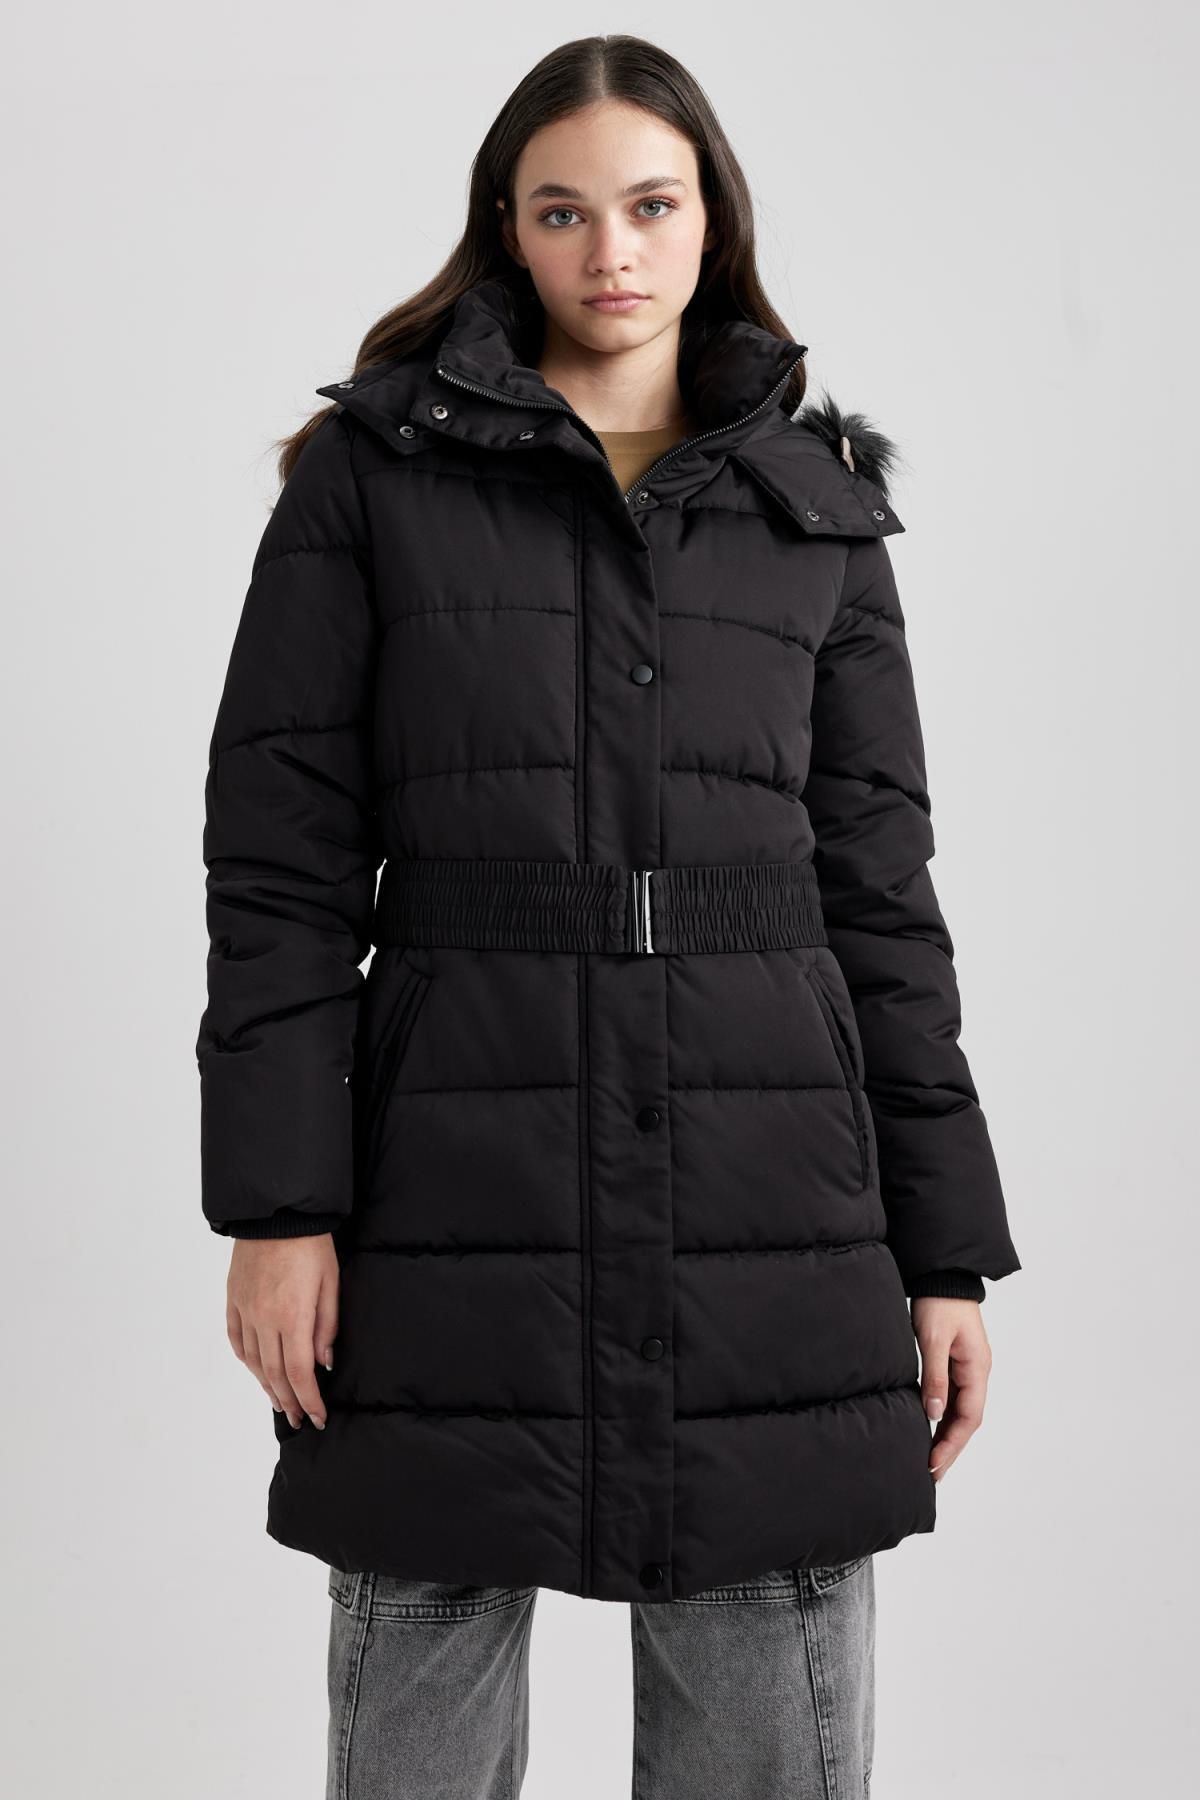 Trendyol it Jackets name Prices Coats & - Styles,